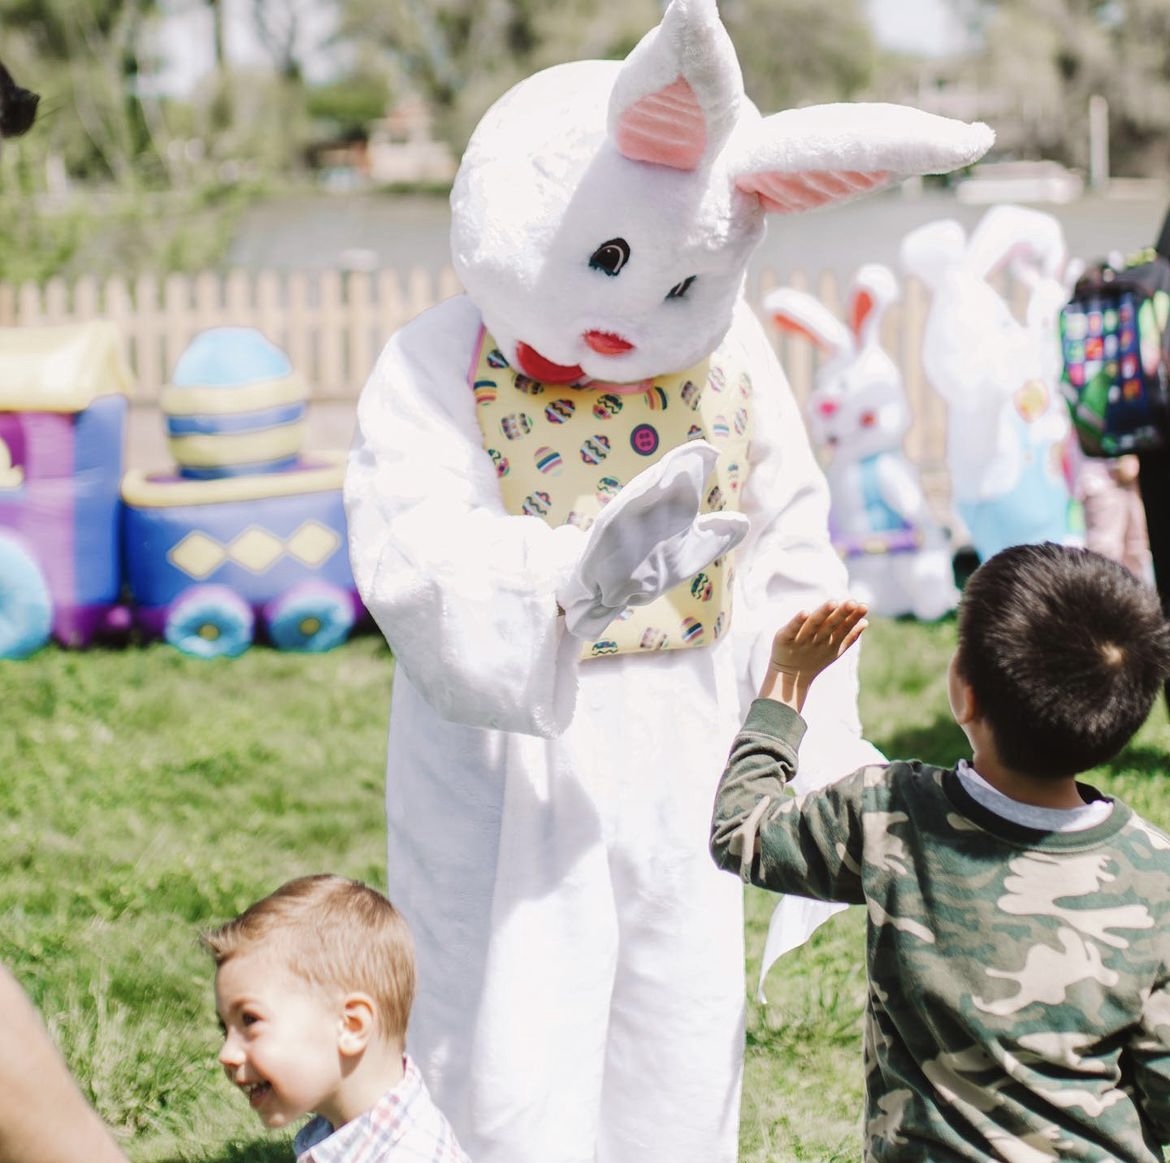 Round up your peeps .... Easter weekend is almost here! 🥳🐰⁠ Hop on over to some of these eggcellent #Sacramento Easter events @Sacramento365 has rounded up ➡ bit.ly/SacramentoEast…. 📸: Sacramento River Train